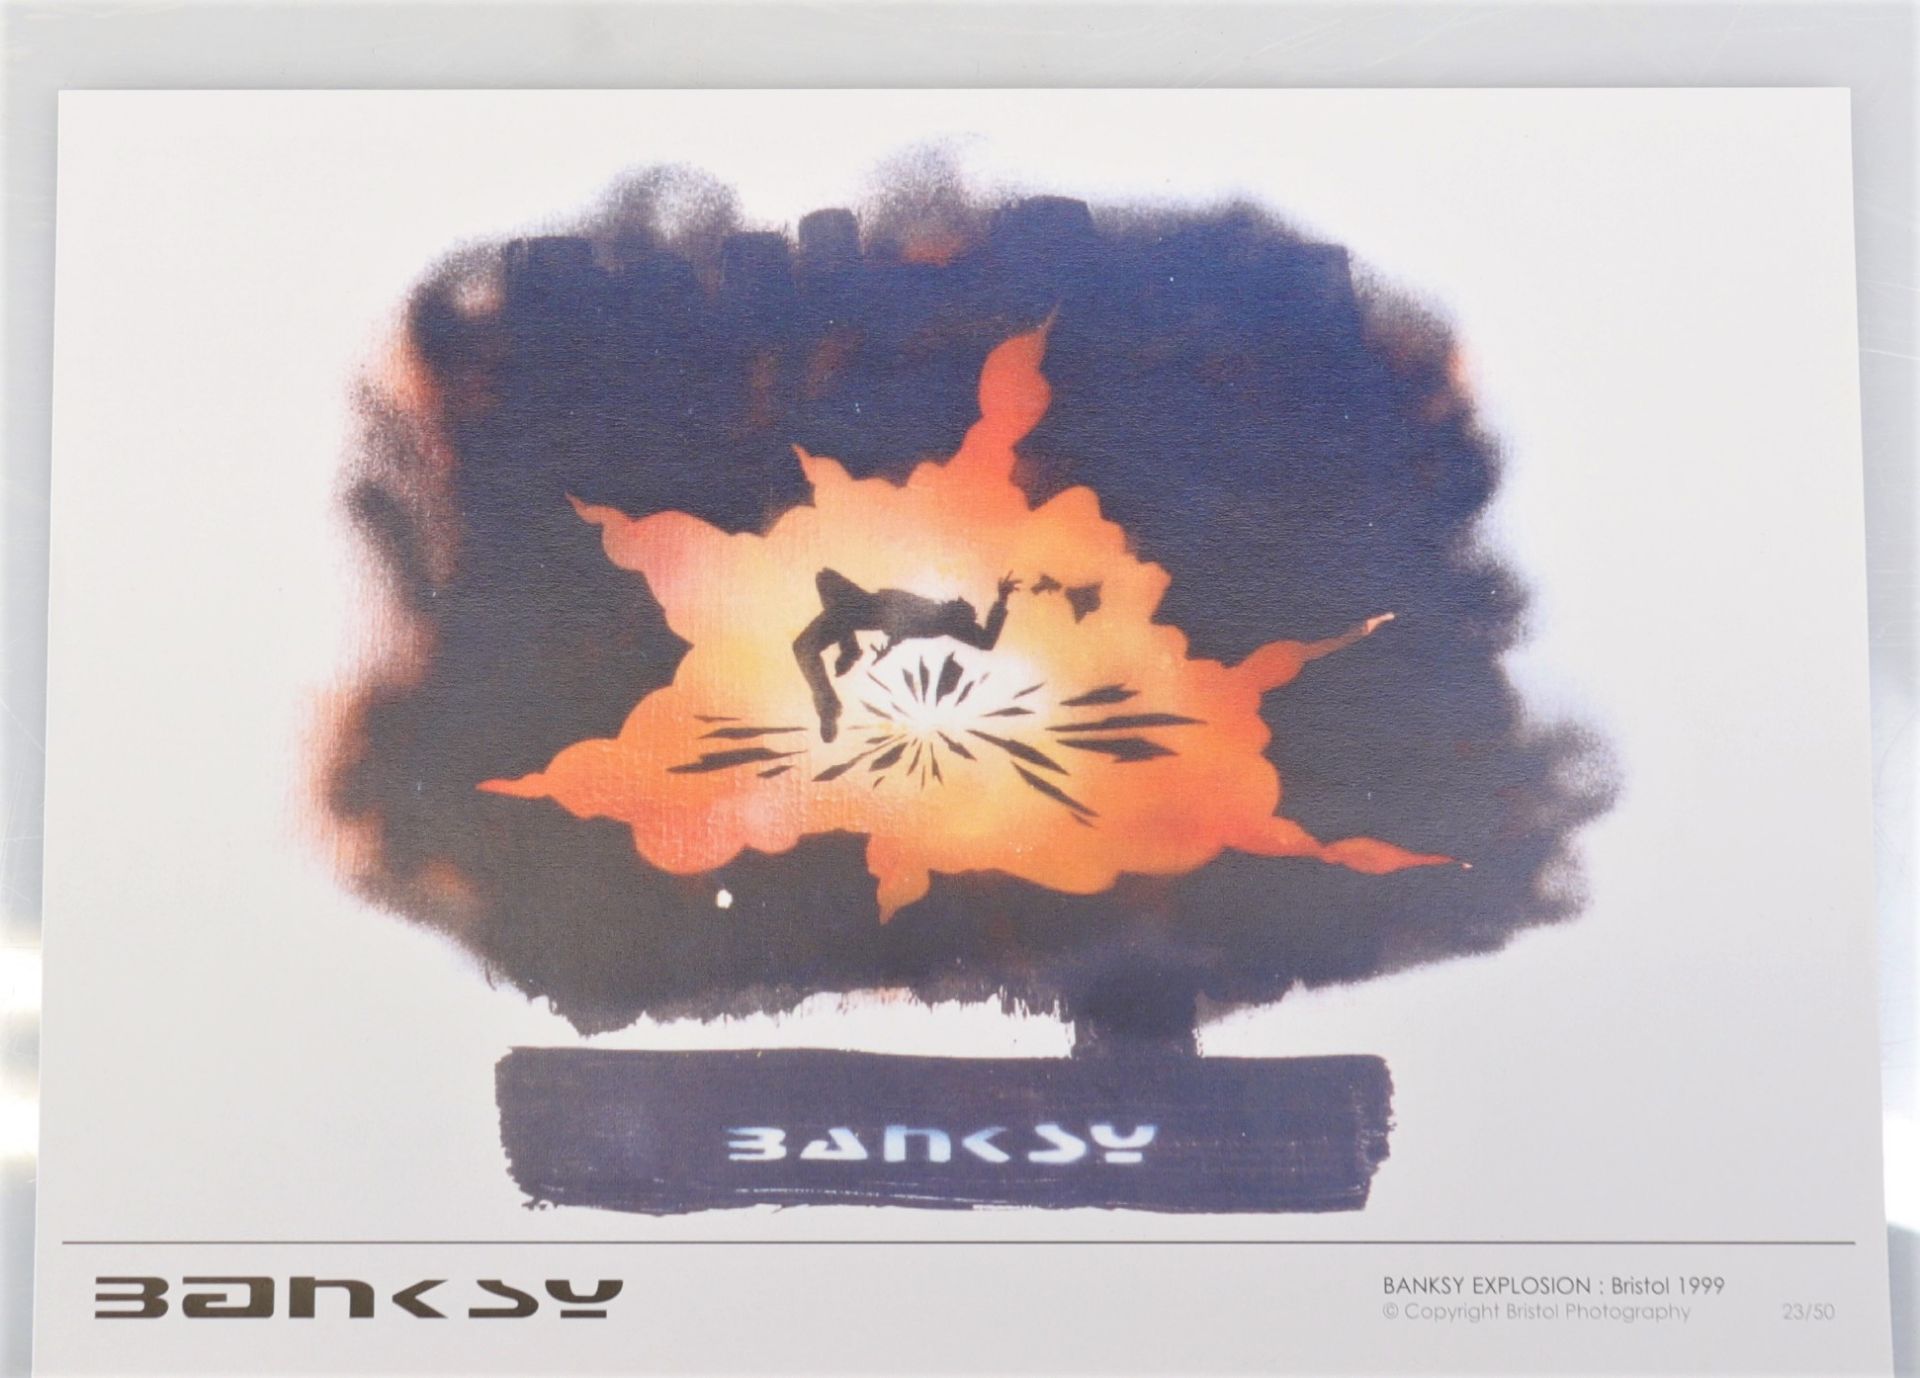 Banksy. Banksy Explosion. Bristol, 1999. Color offset print, published by Bristol Photography in 199